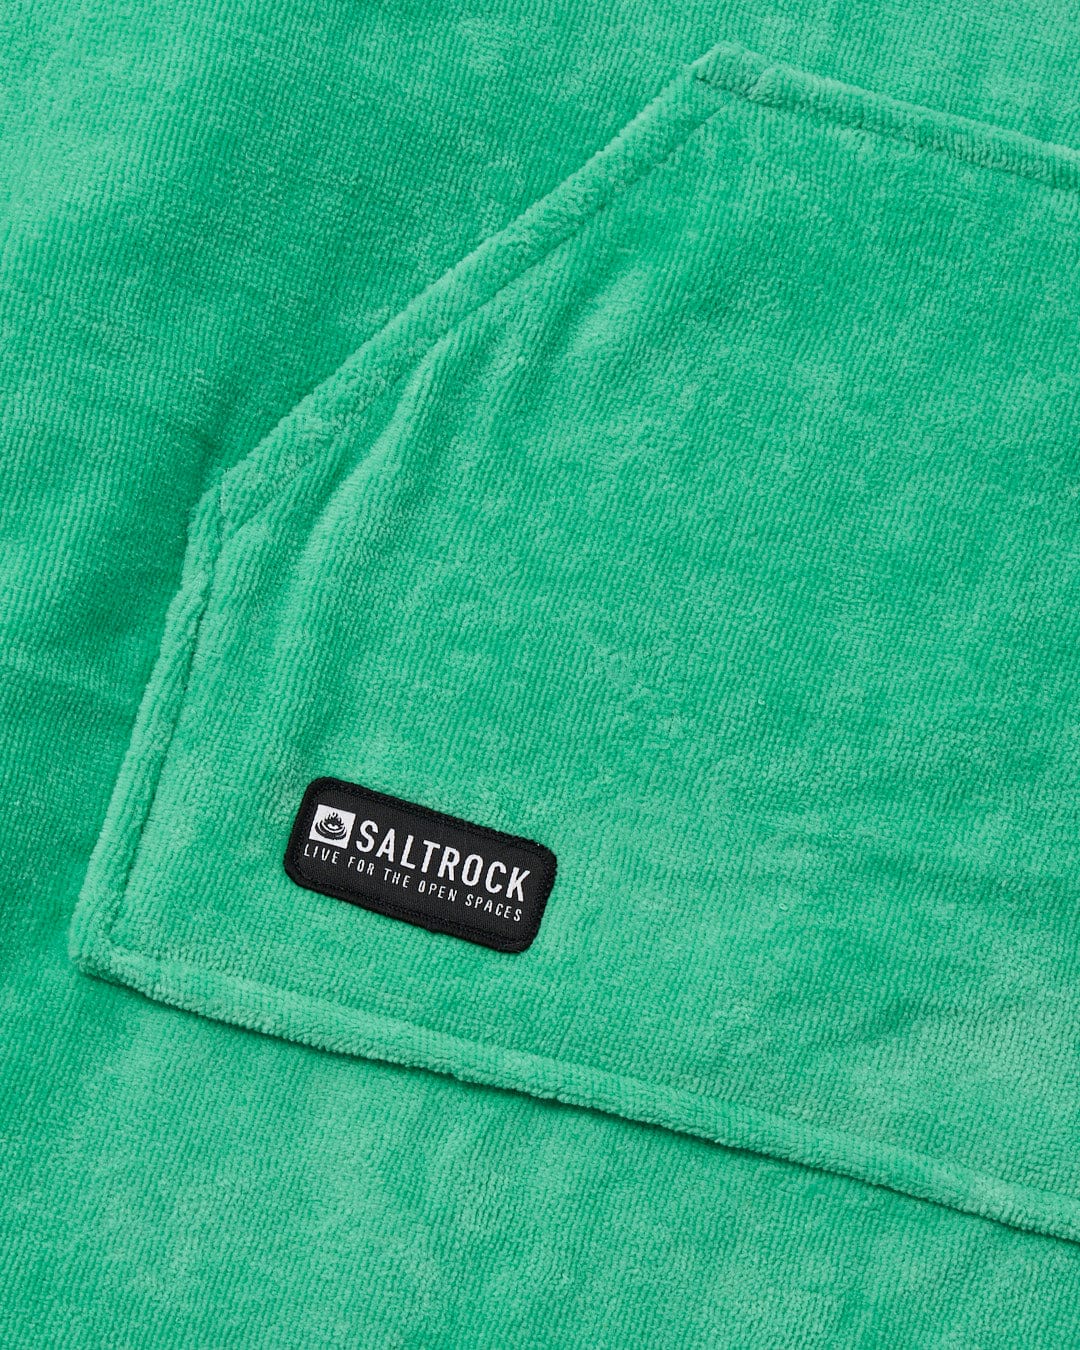 Close-up of a green absorbent cotton towelling Saltrock Corp Changing Towel - Green with a brand label.